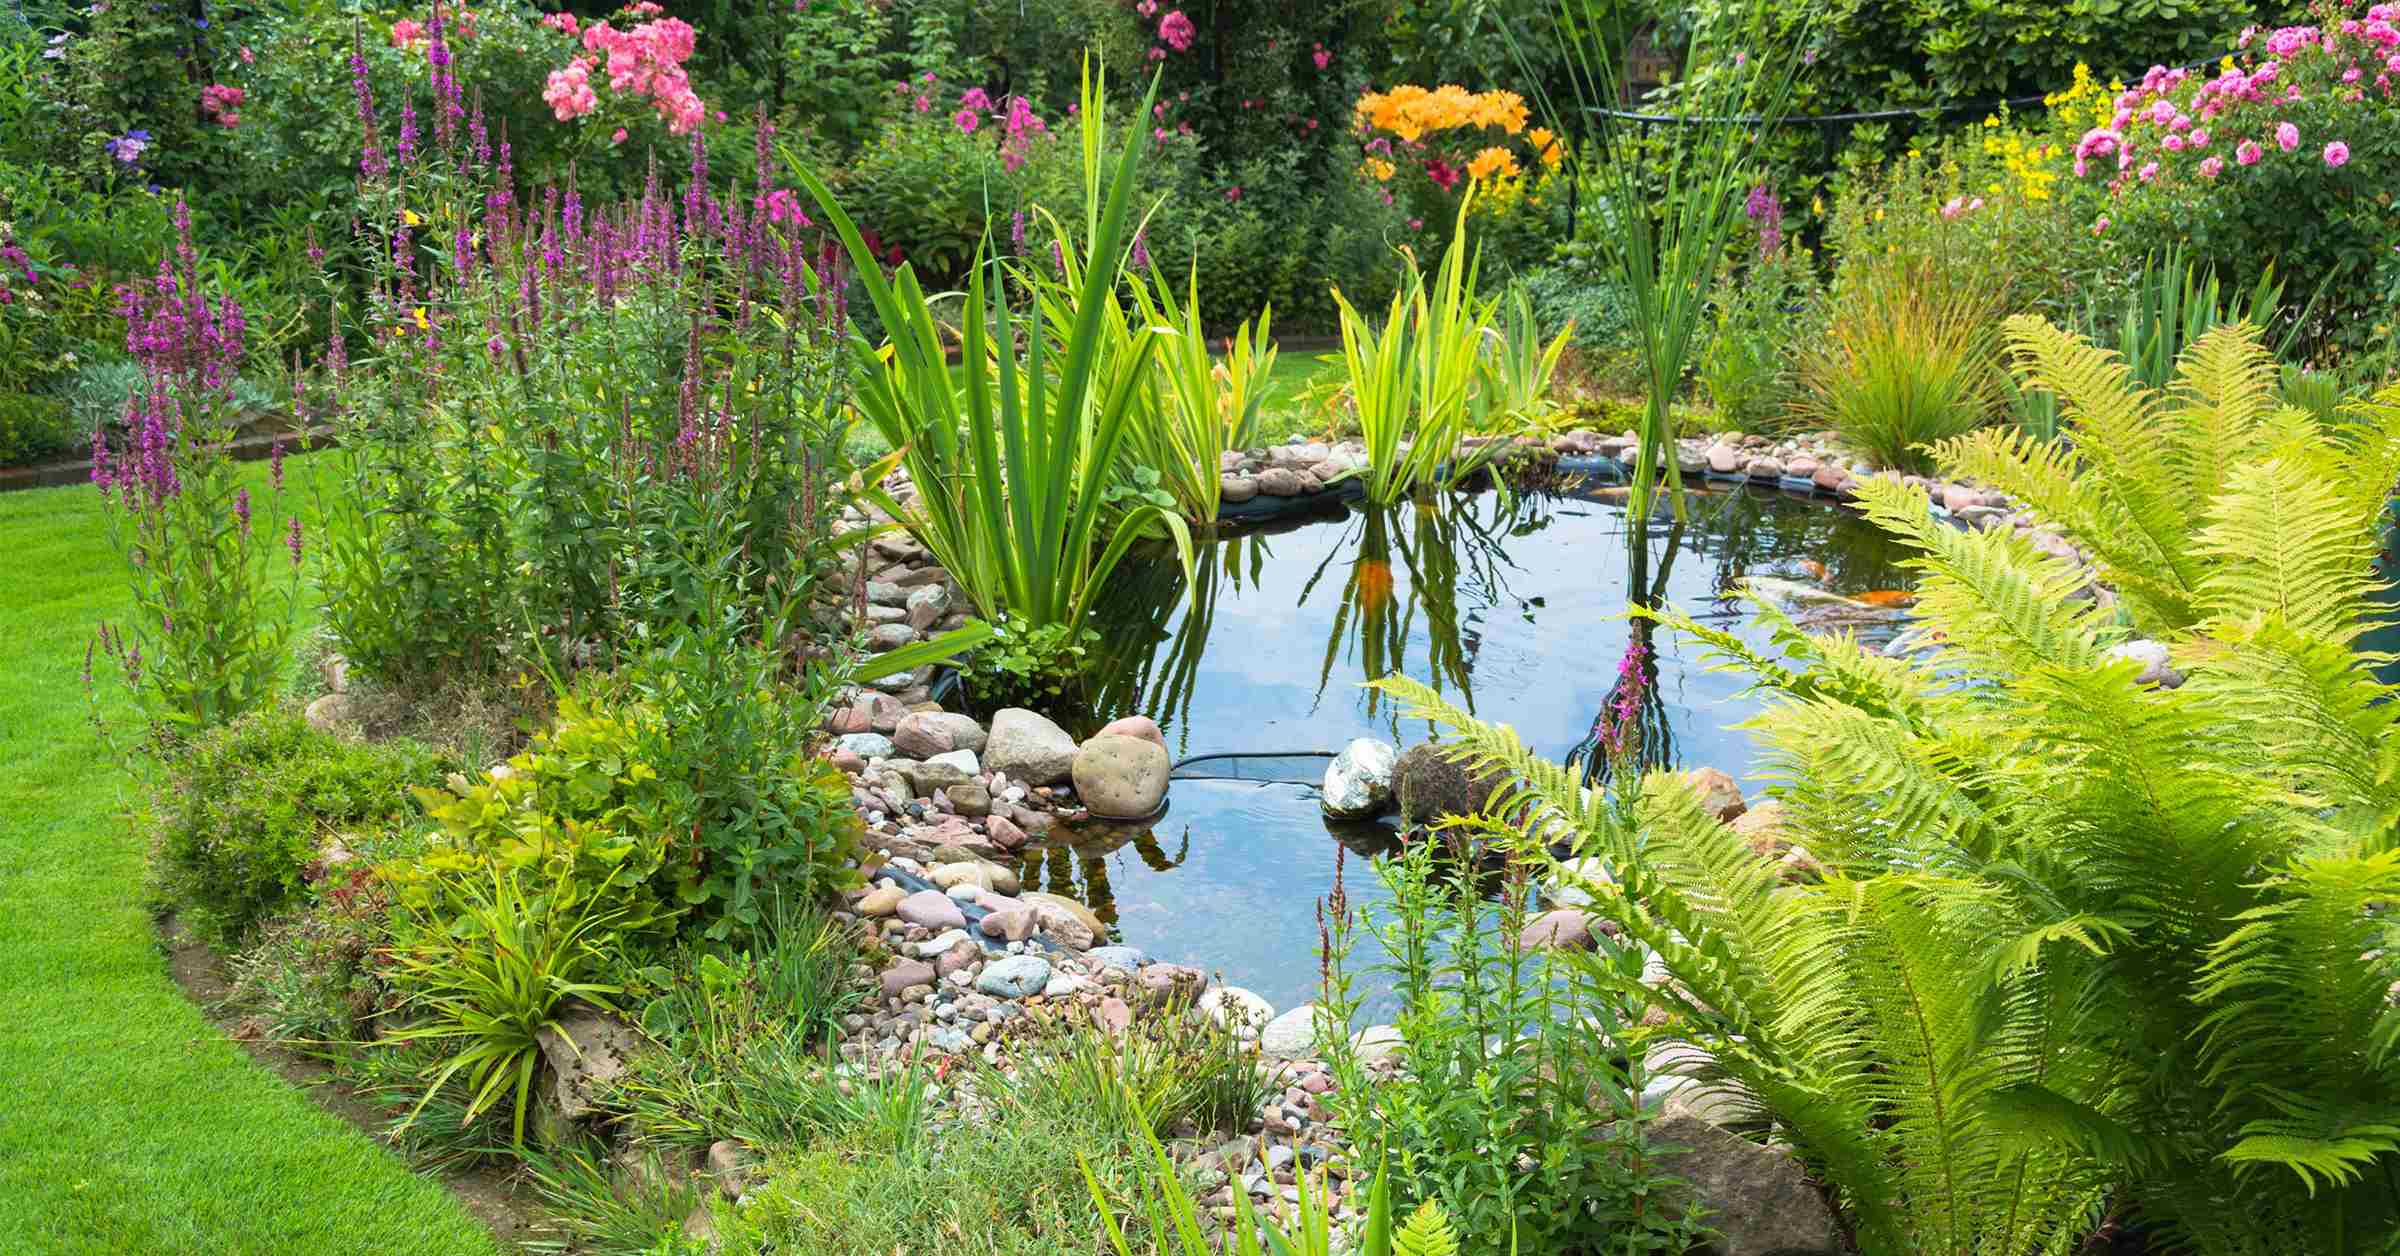 How Much Does It Cost To Build A Pond In Your Backyard